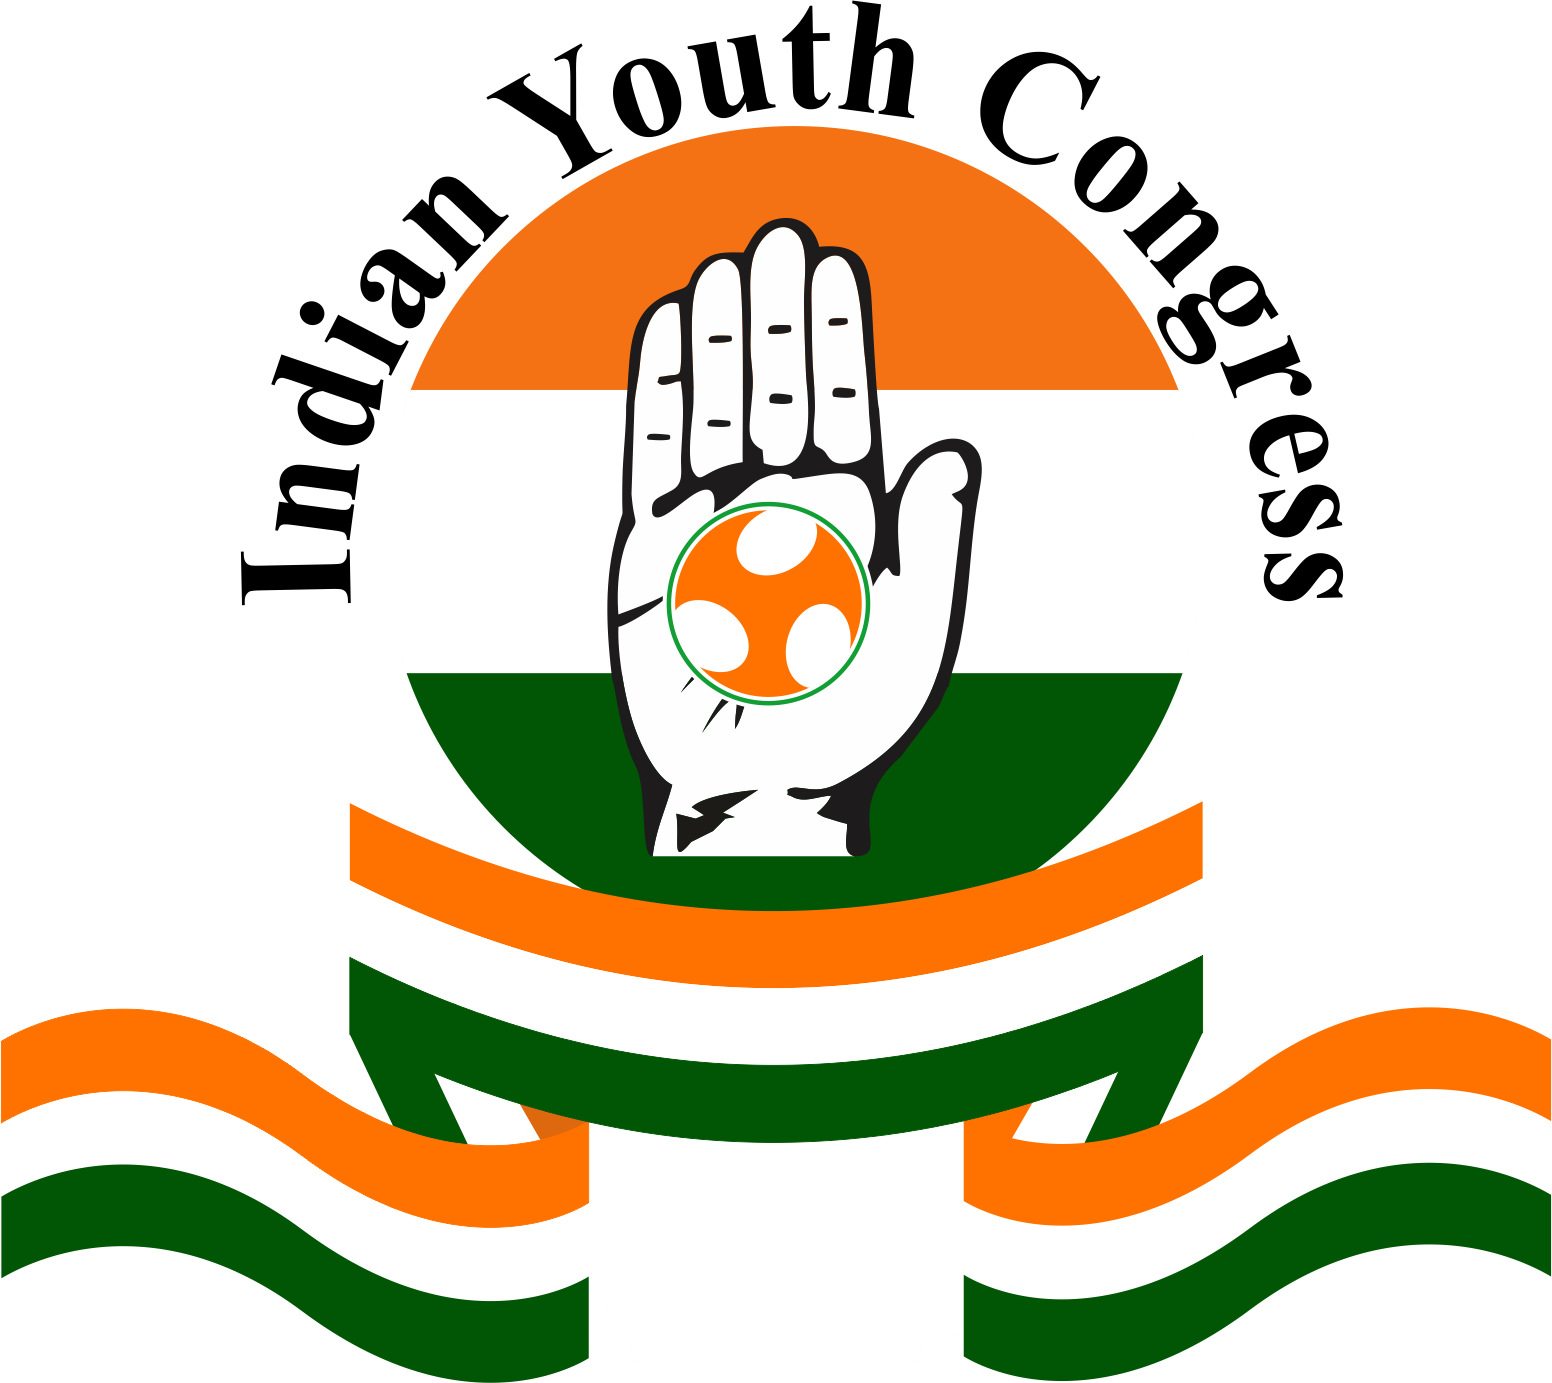 Youth Congress units of NE states blame Assam CM for rising temperature